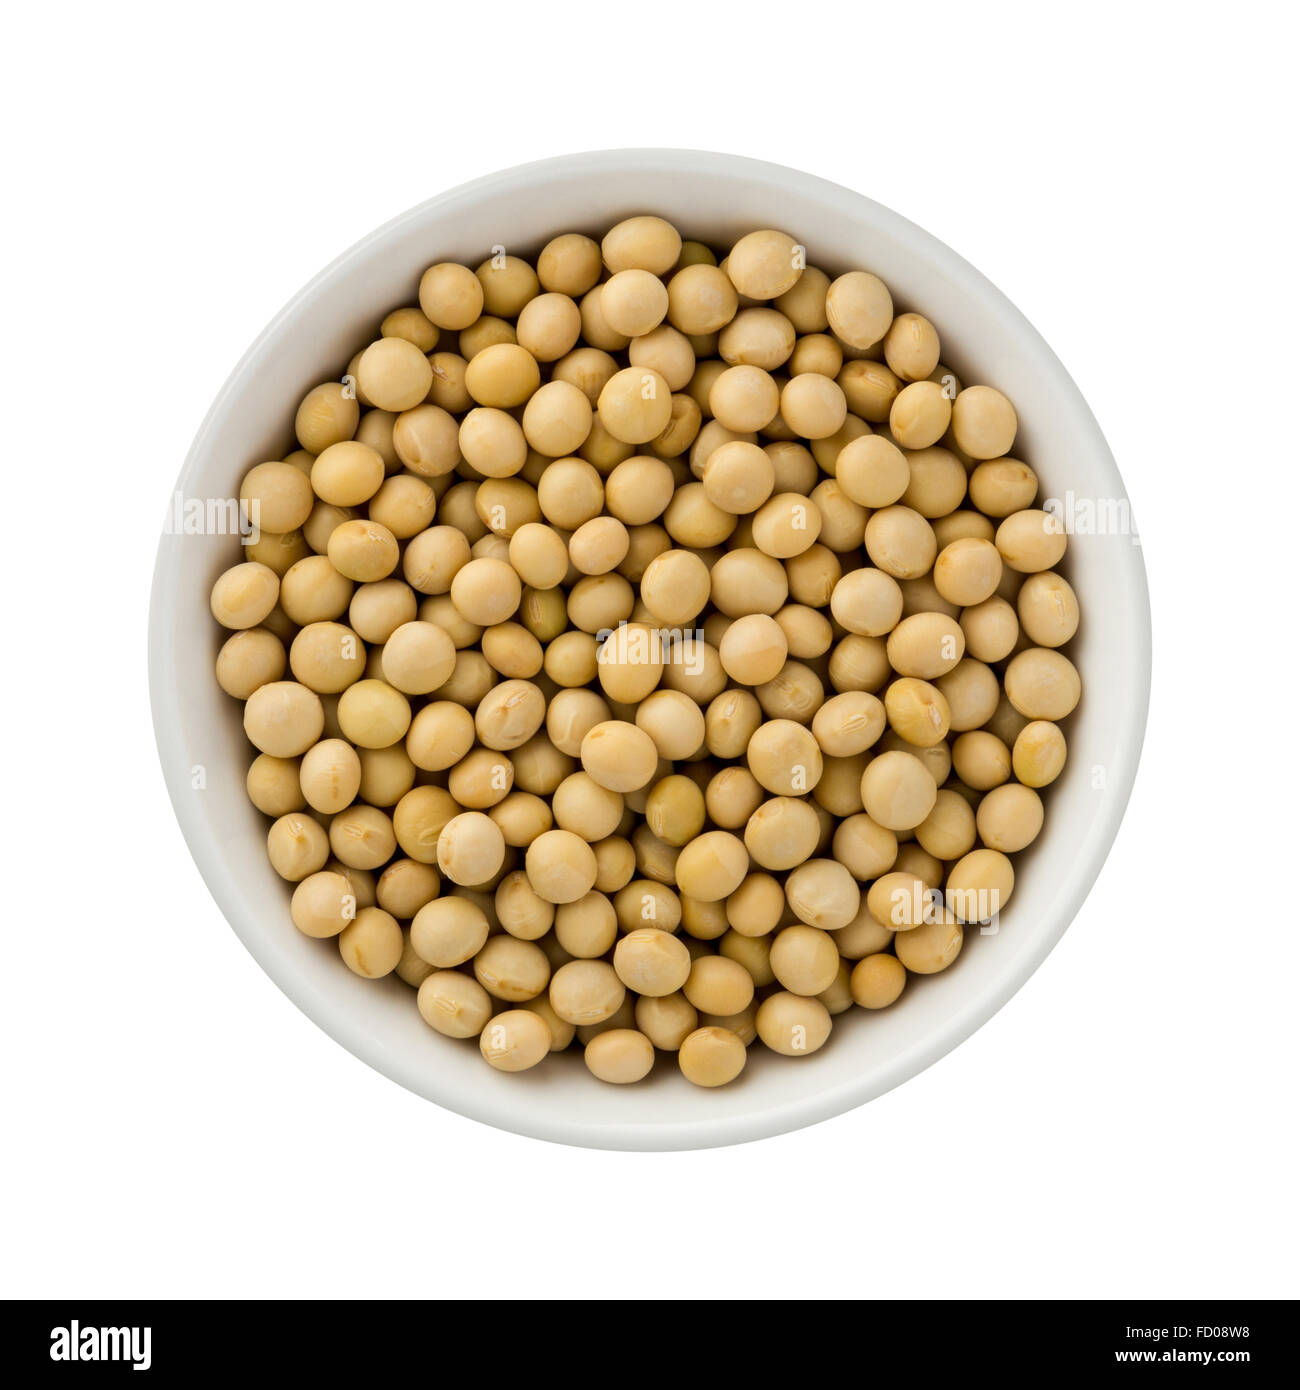 Soybeans in a ceramic bowl. The image is a cut out, isolated on a white background. Stock Photo